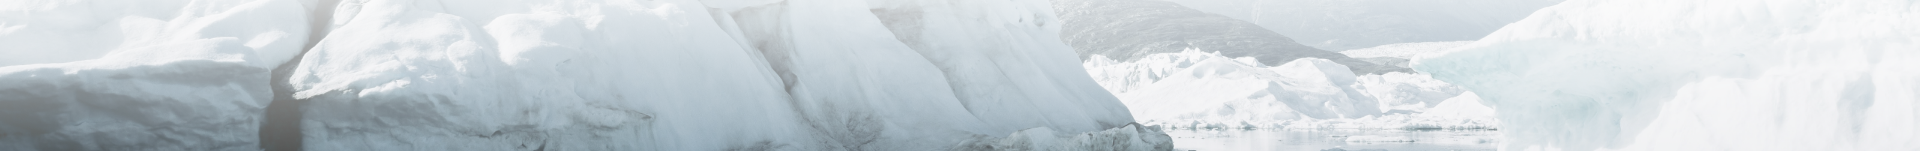 icy-montains-banner